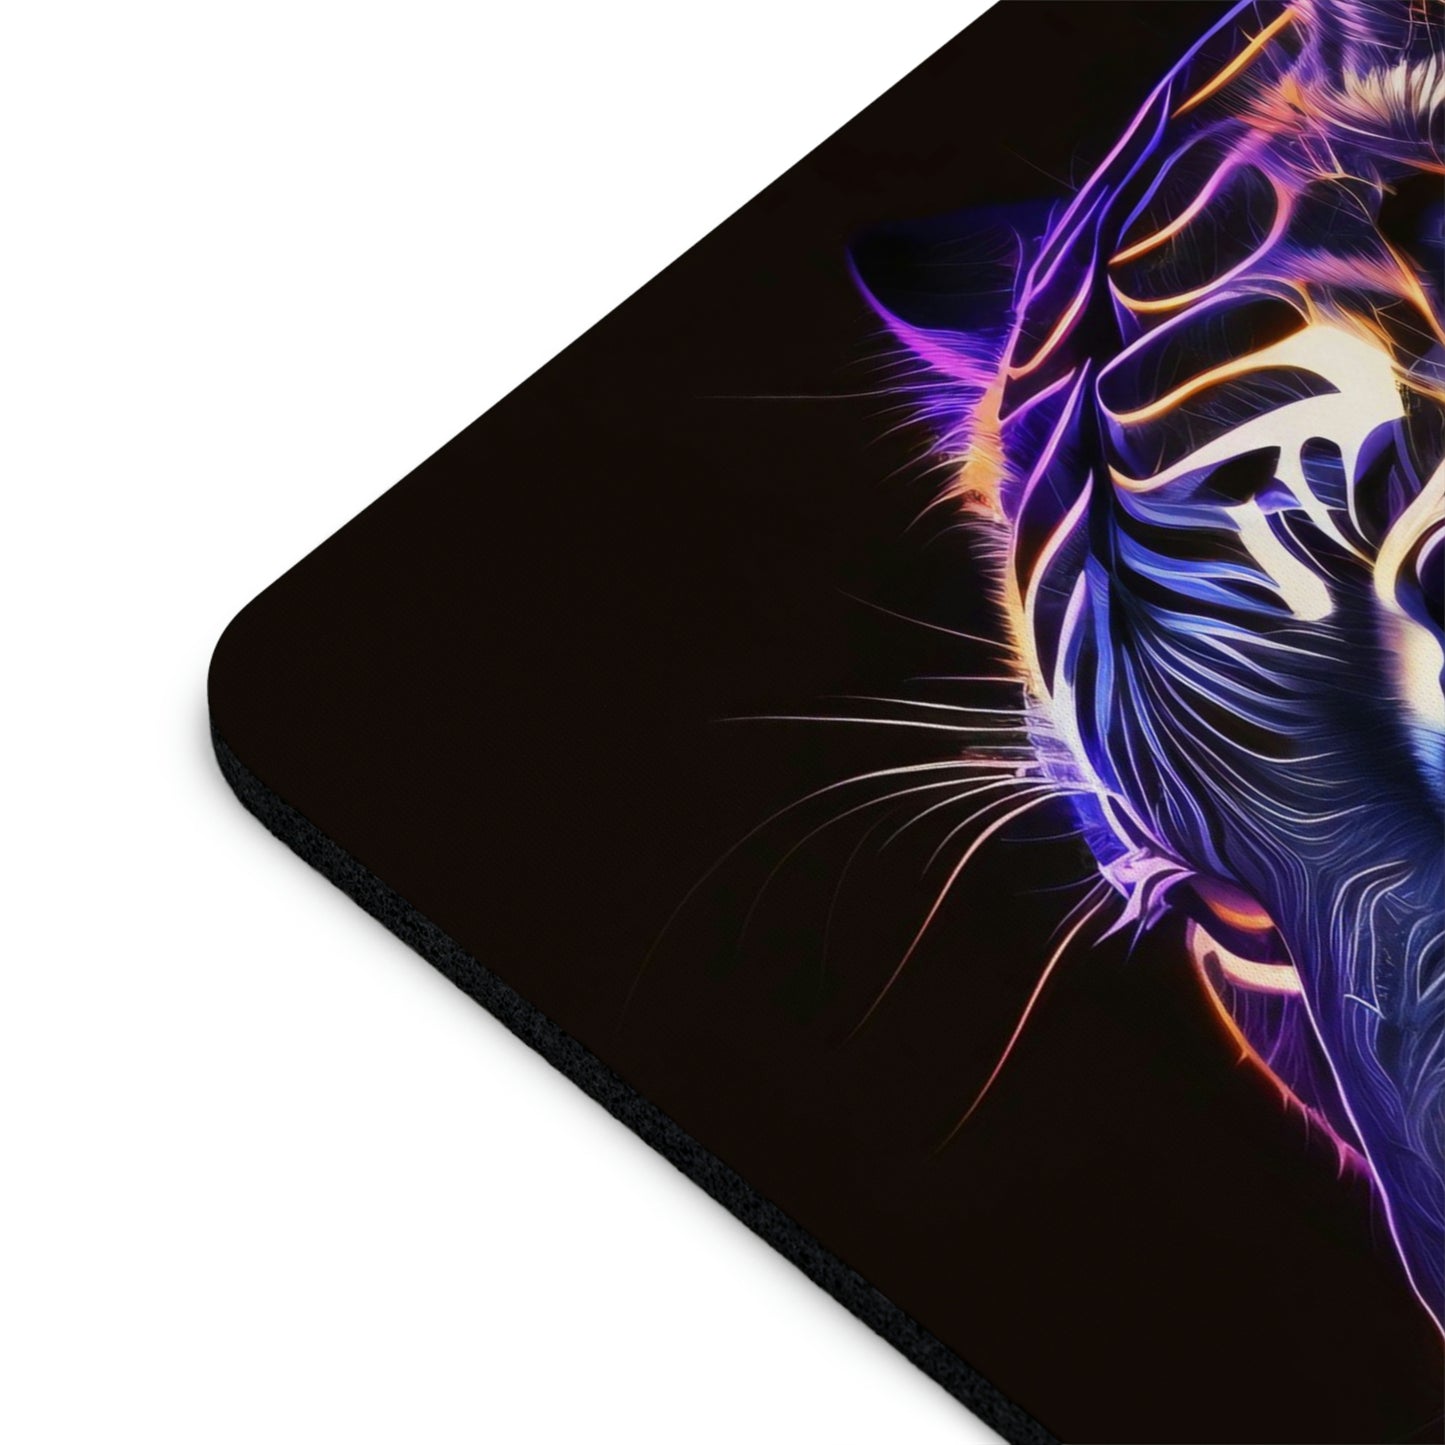 Black Light Tiger Mouse Pad, Gaming Mouse Pad, Rectangular Mouse Pad, Work Mouse Pad, Non-slip Mouse Pad